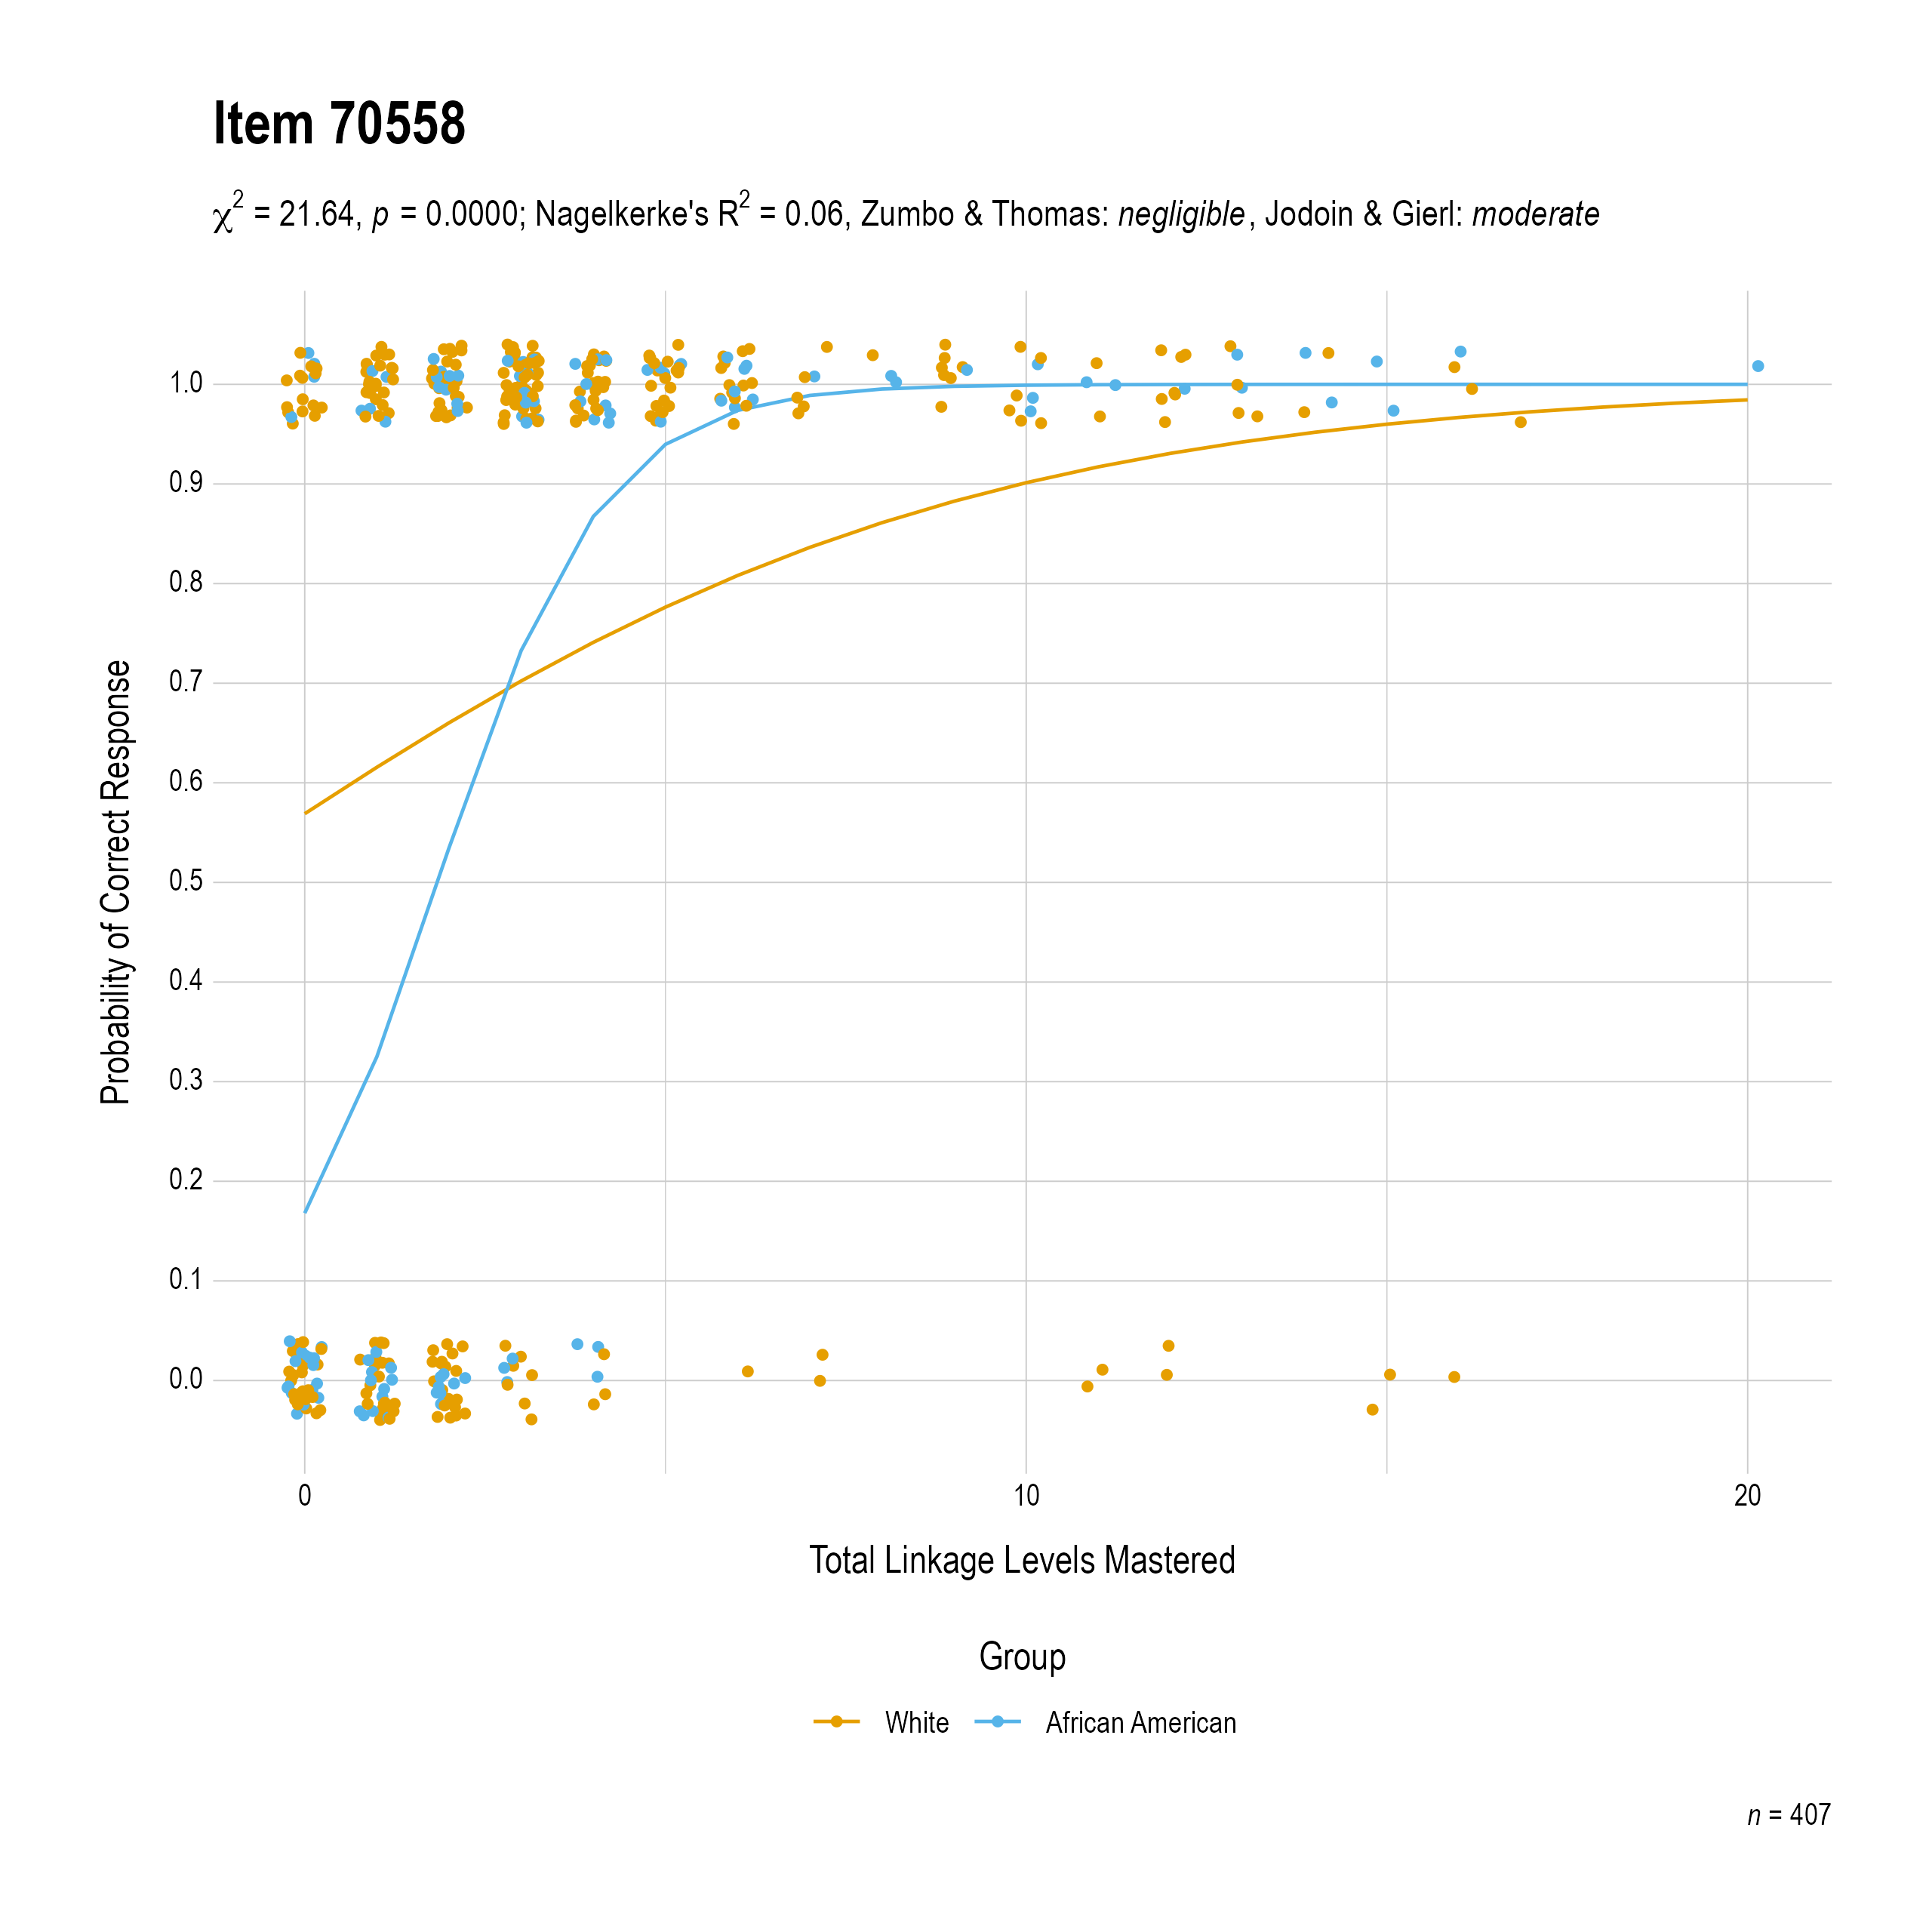 The plot of the combined race differential item function evidence for Mathematics item 70558. The figure contains points shaded by group. The figure also contains a logistic regression curve for each group. The total linkage levels mastered in is on the x-axis, and the probability of a correct response is on the y-axis.